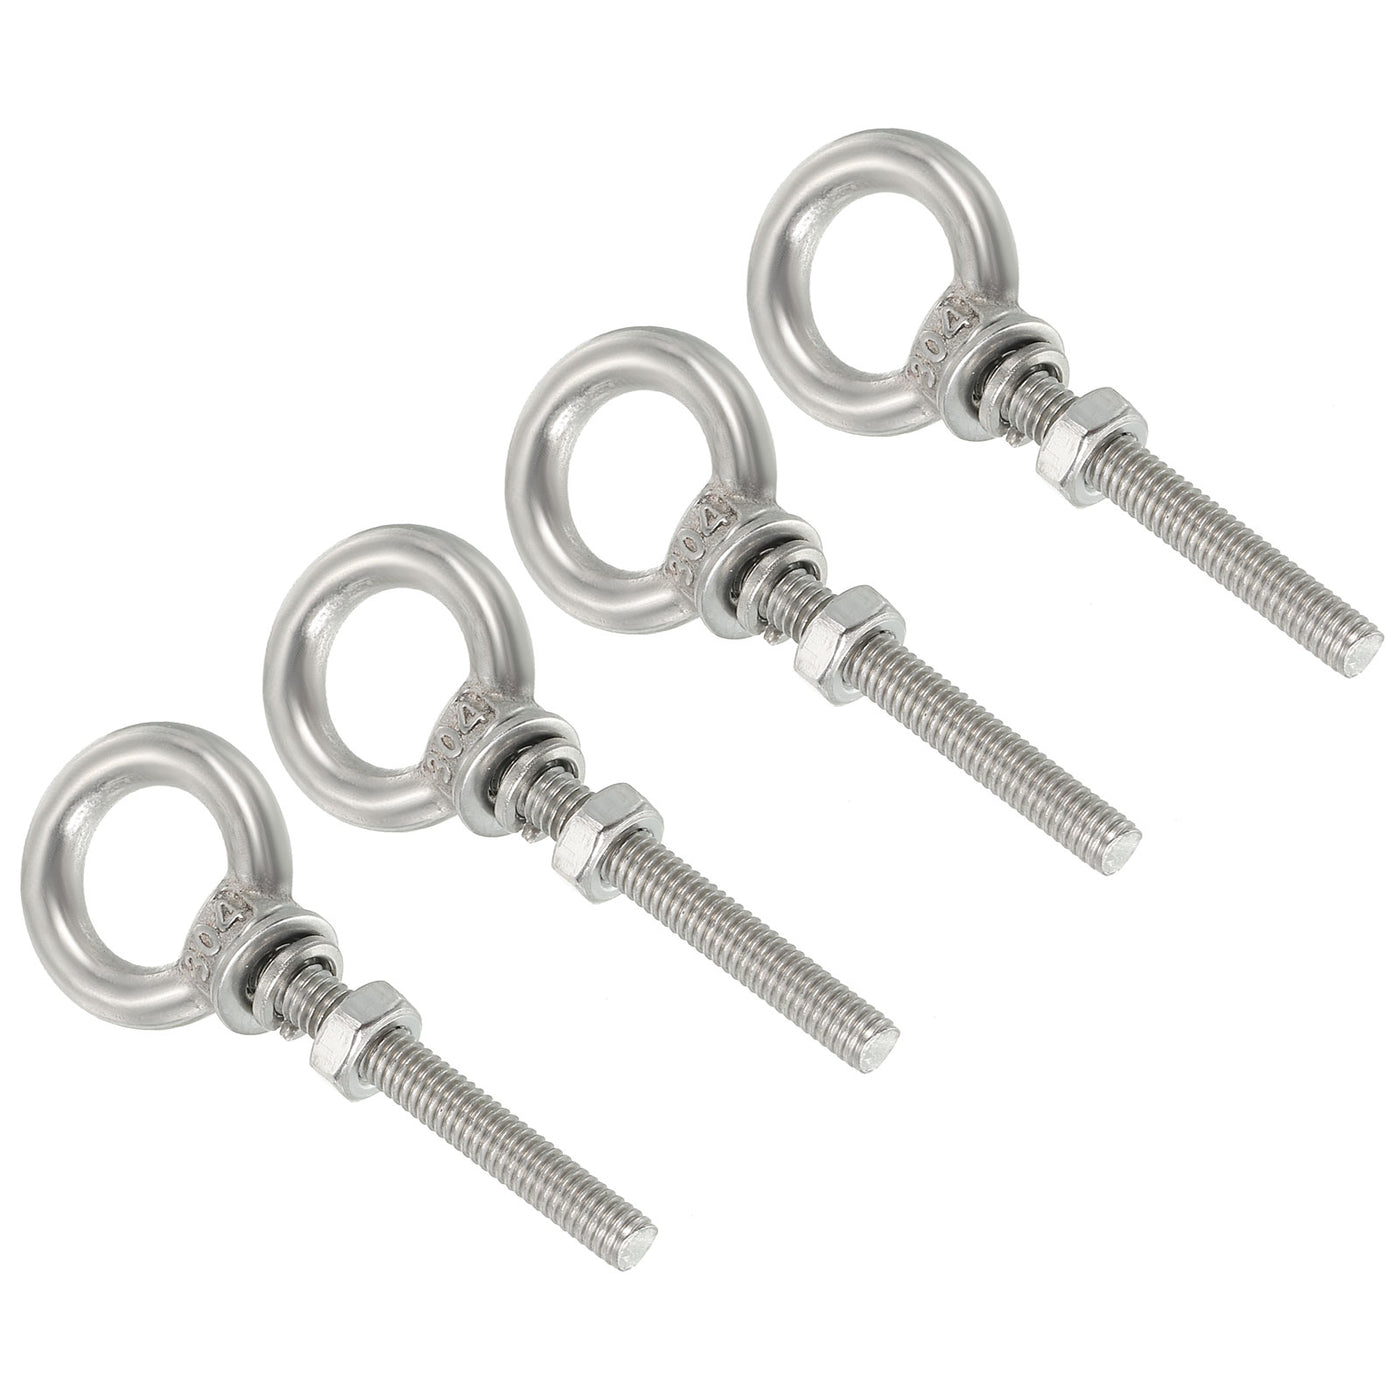 uxcell Uxcell M10x30 3/8"x1.18" Stainless Steel Eye Bolts Threaded Screw Eyebolt Shoulder Ring with Nuts Washers for Lifting Hanging, 4 Set